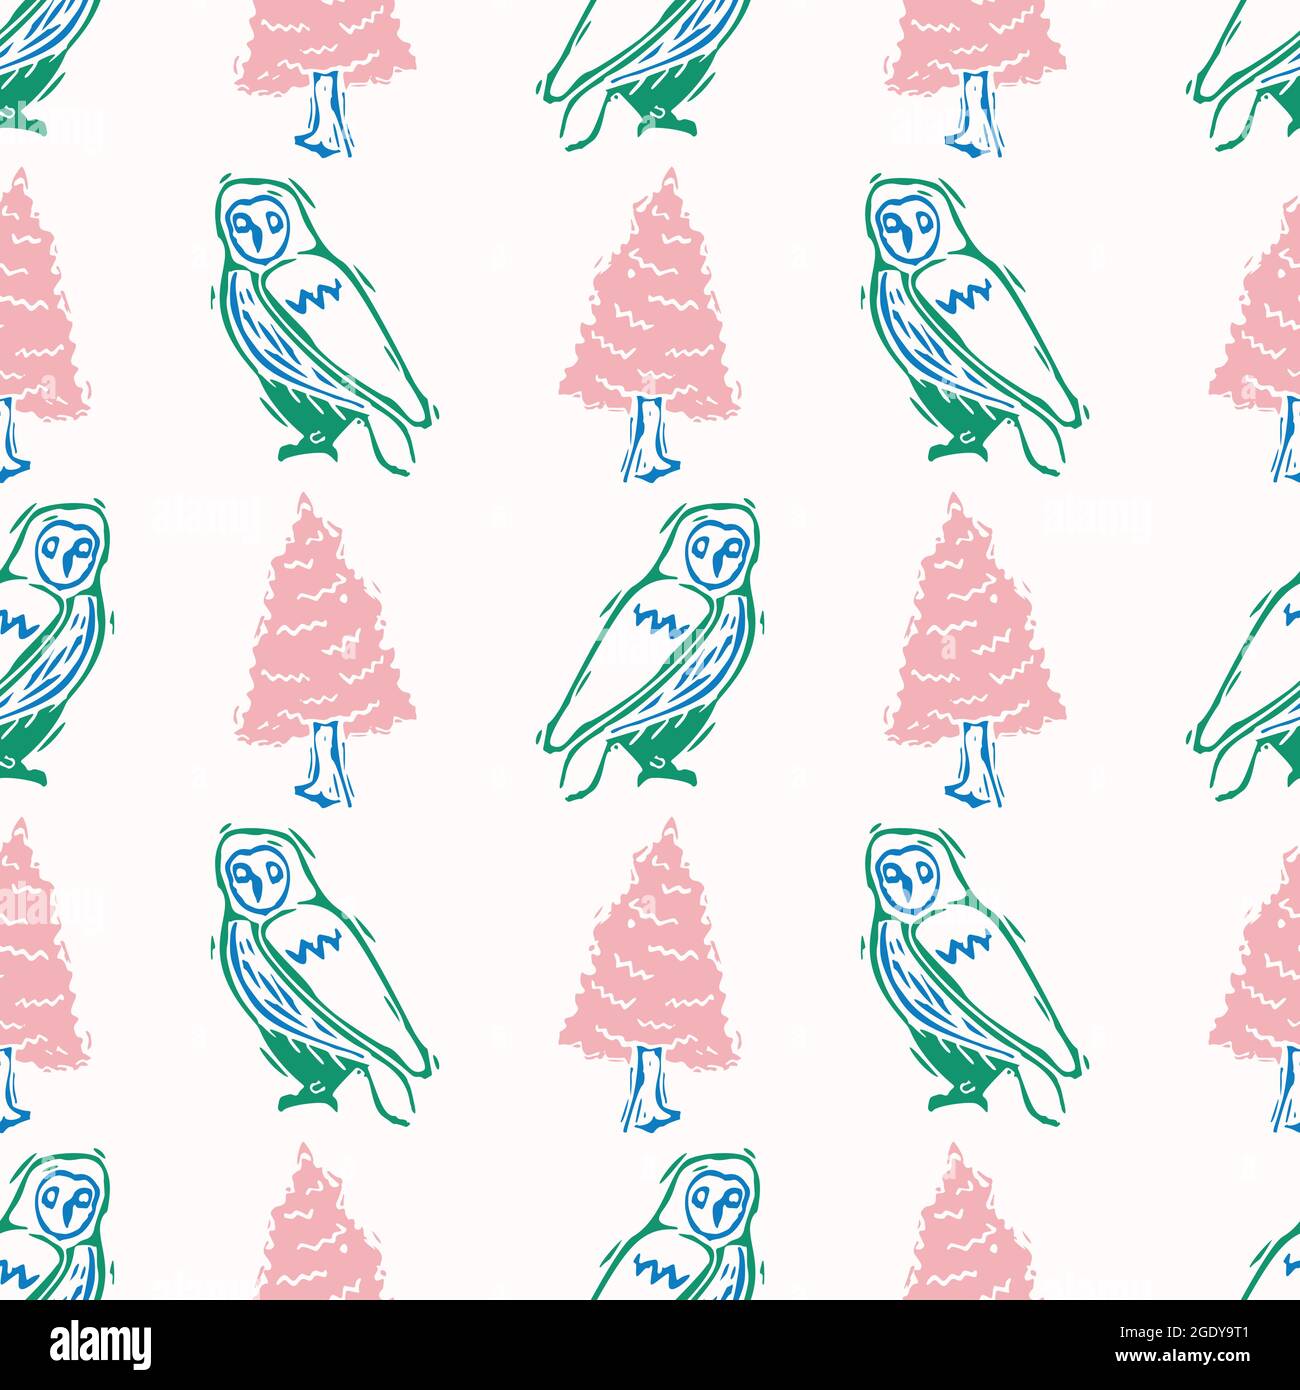 Playful fresh doodle owl shape seamless background. Modern trendy minimal retro style motif pattern. Hand drawn simple colorful design isolated on Stock Vector